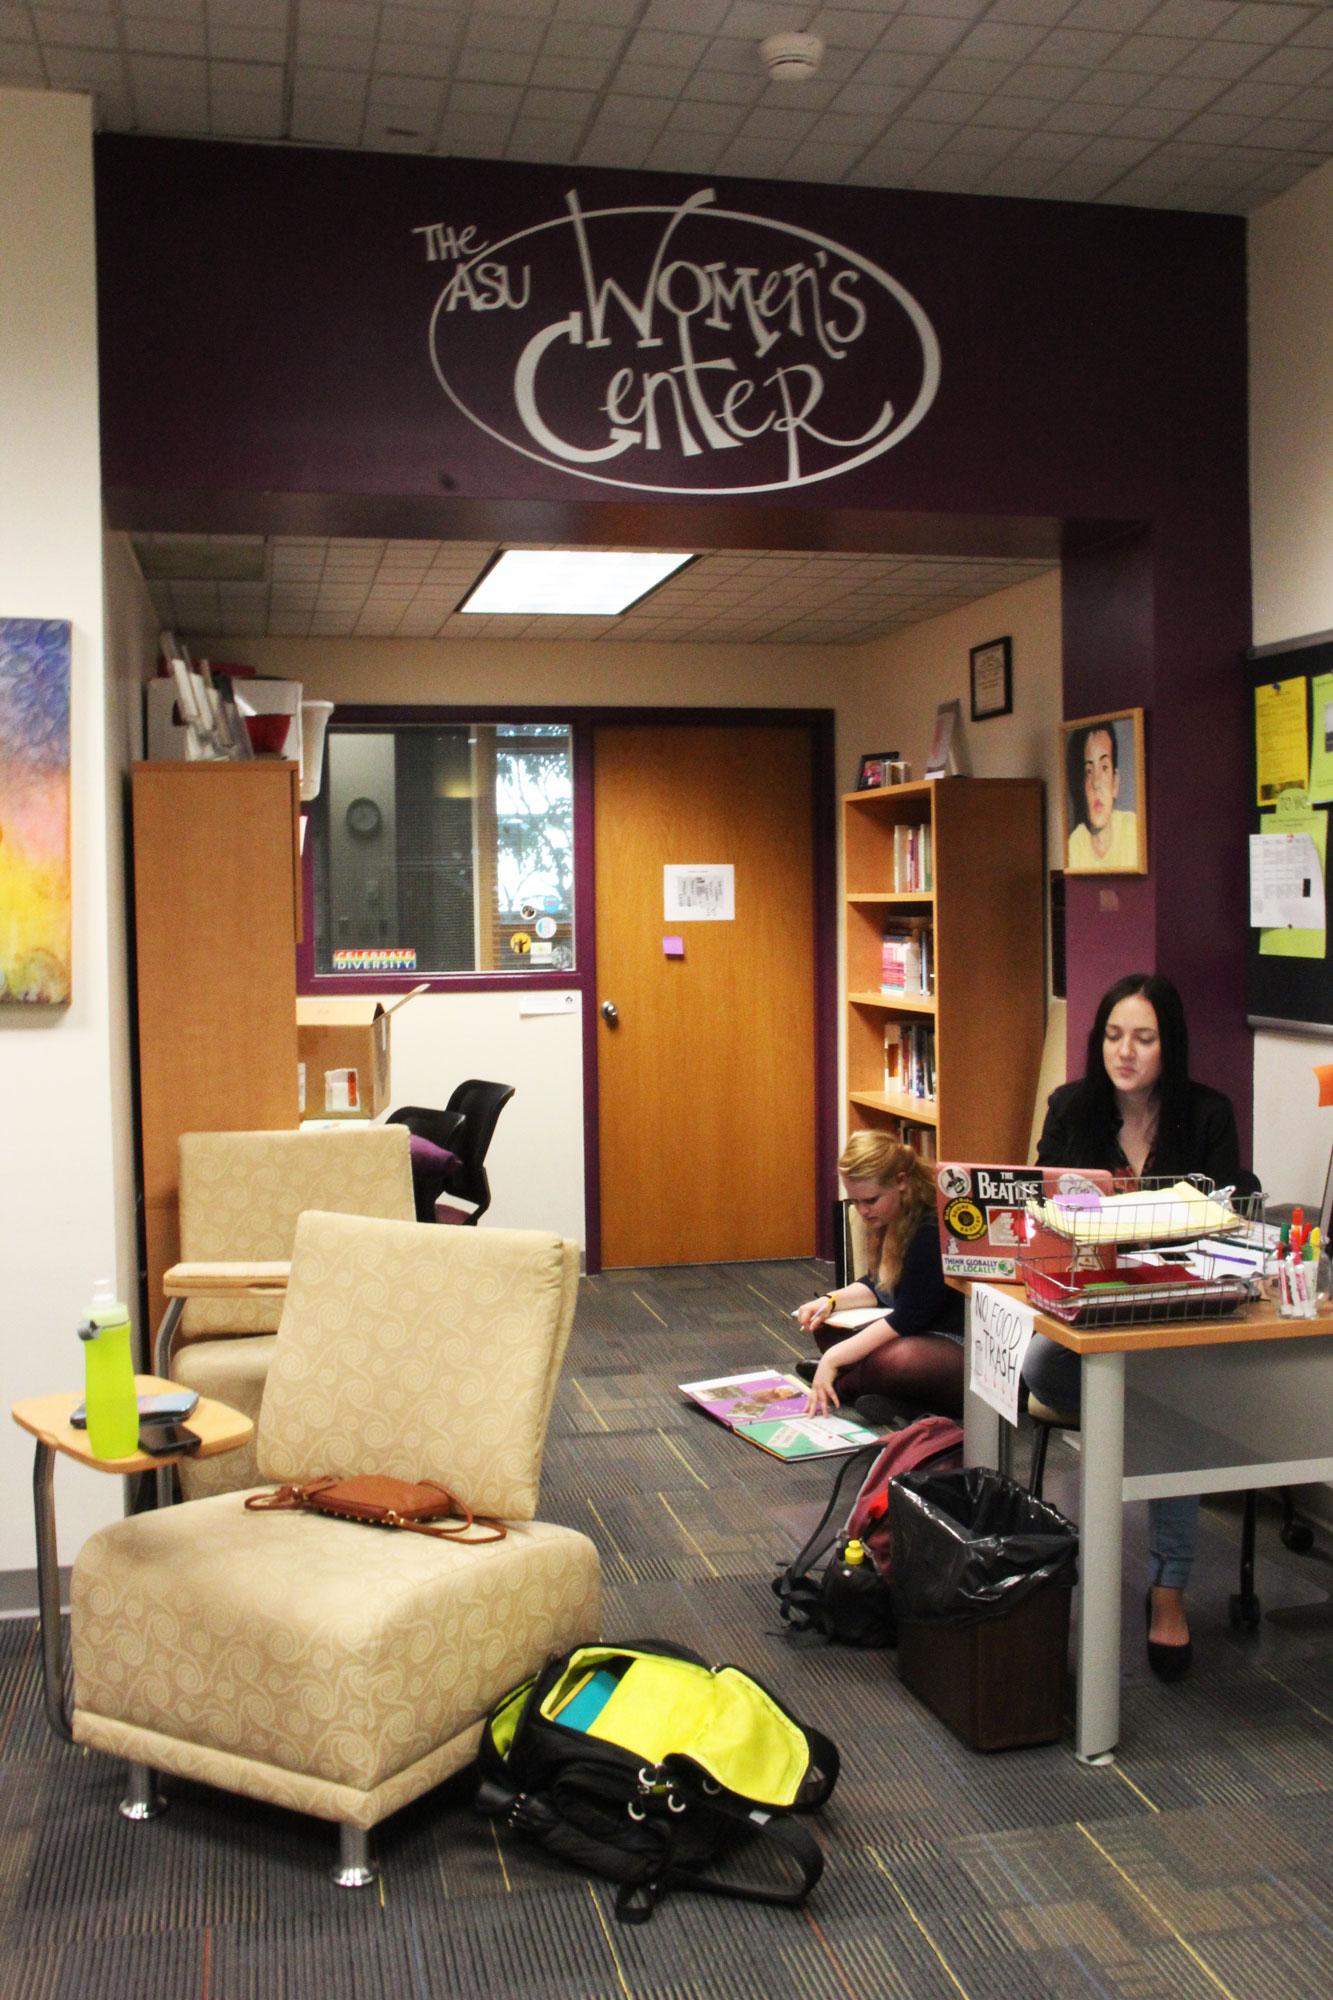 Volunteers at the Womens Center work one-hour desk shifts, answer questions and address concerns from students, faculty and staff. Alex Gates | The Appalachian